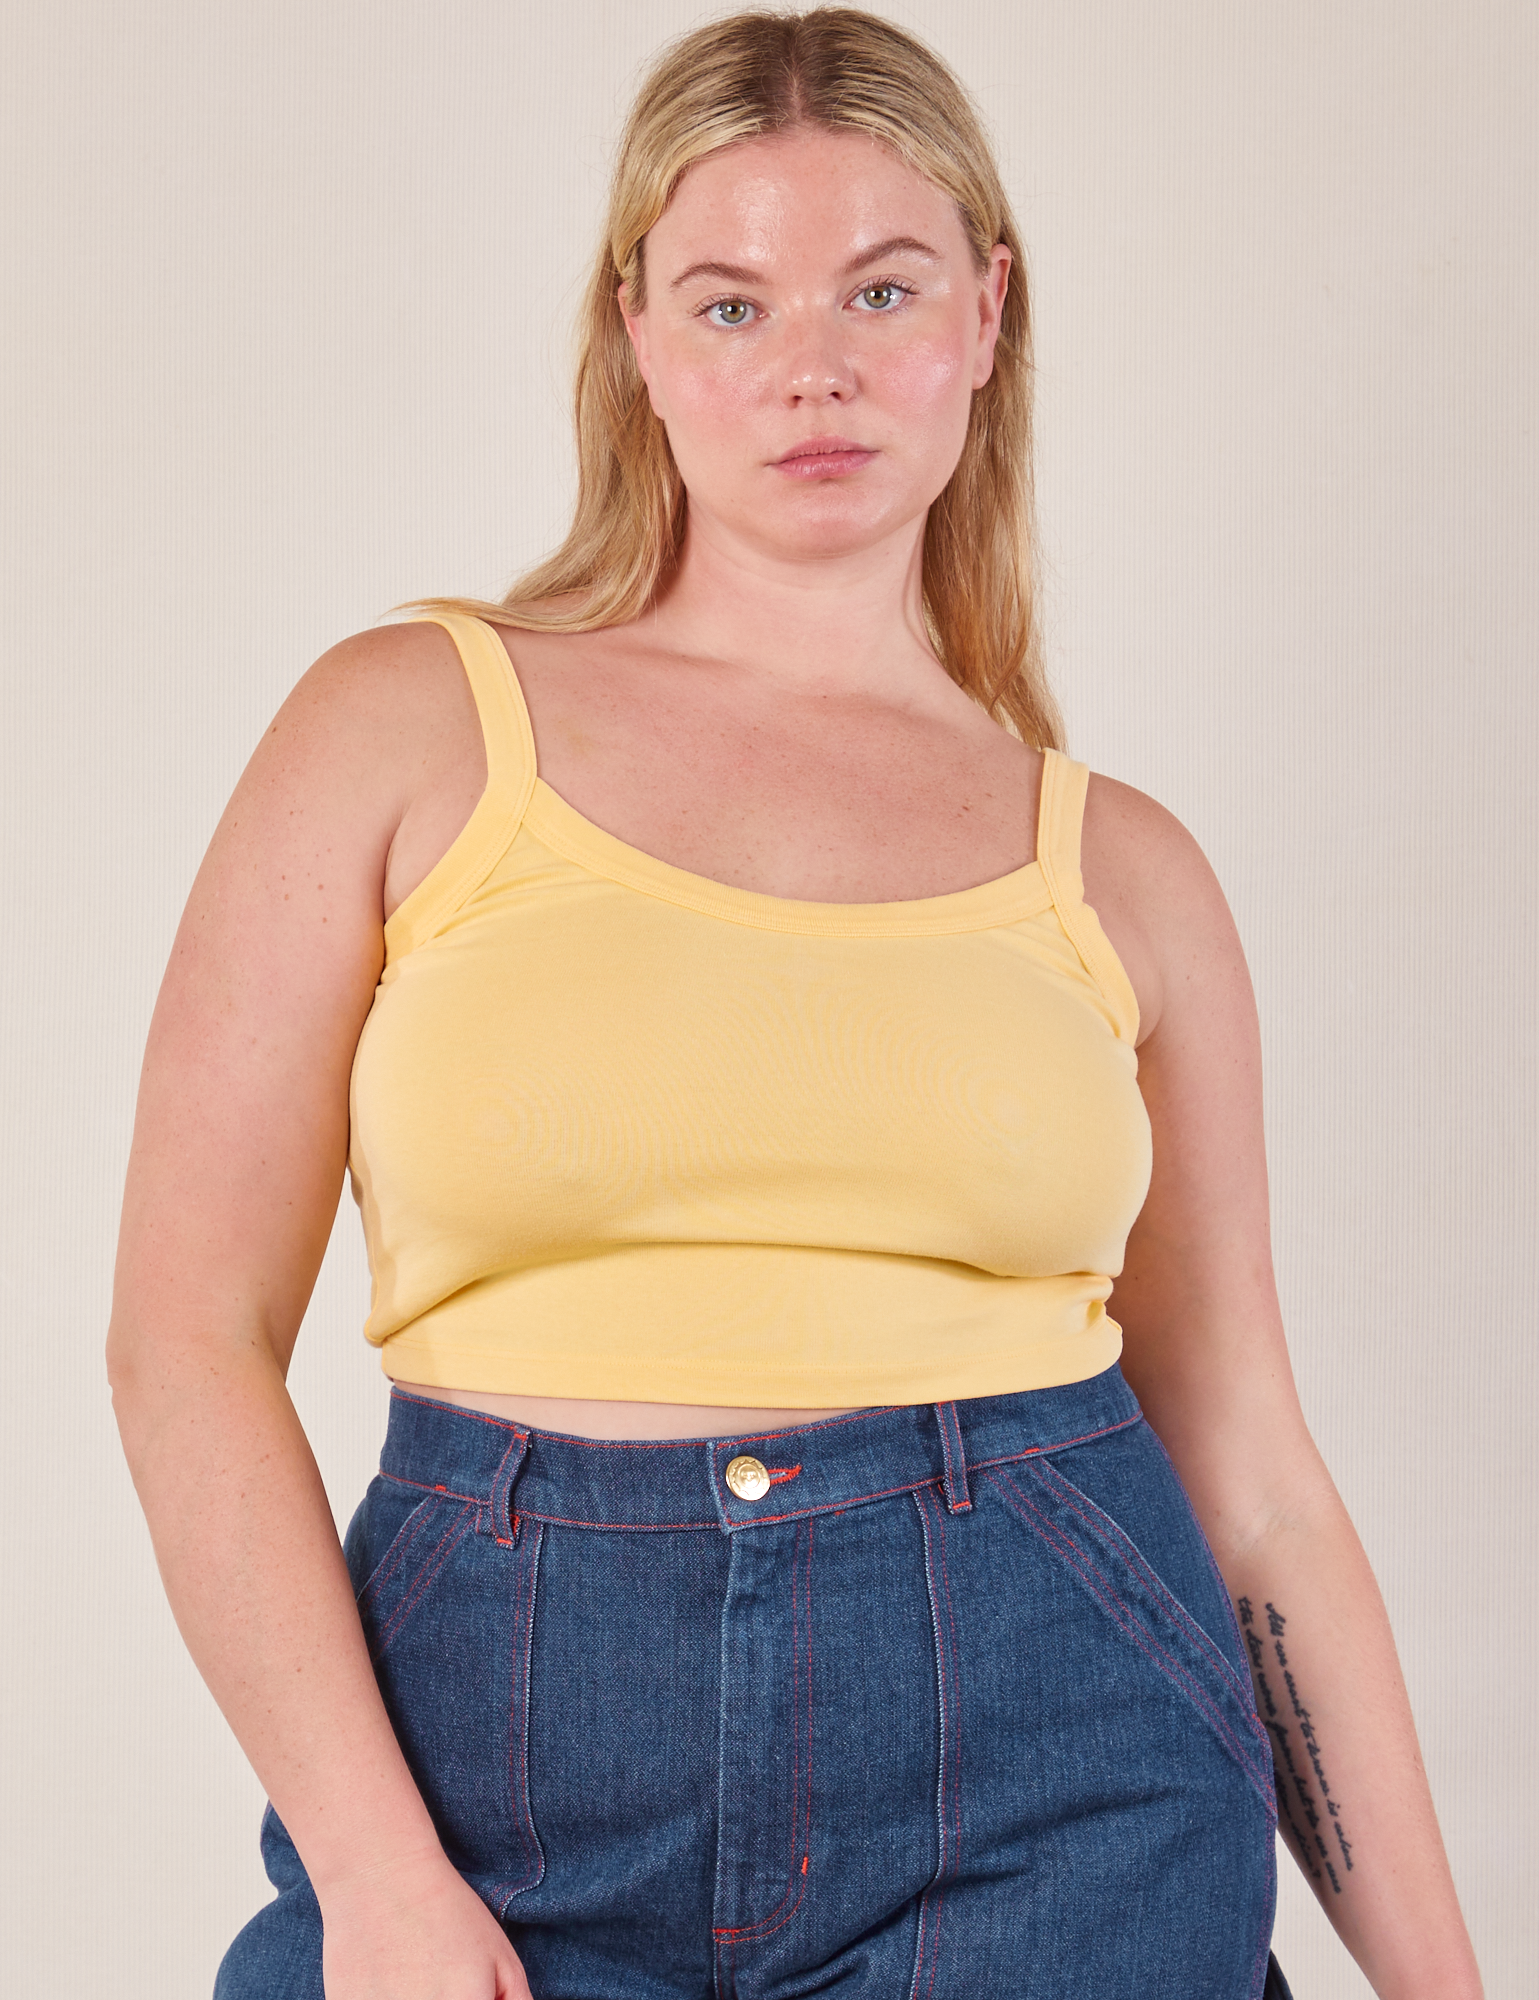 Lish is 5’8” and wearing M Cropped Cami in Butter Yellow paired with dark wash Carpenter Jeans